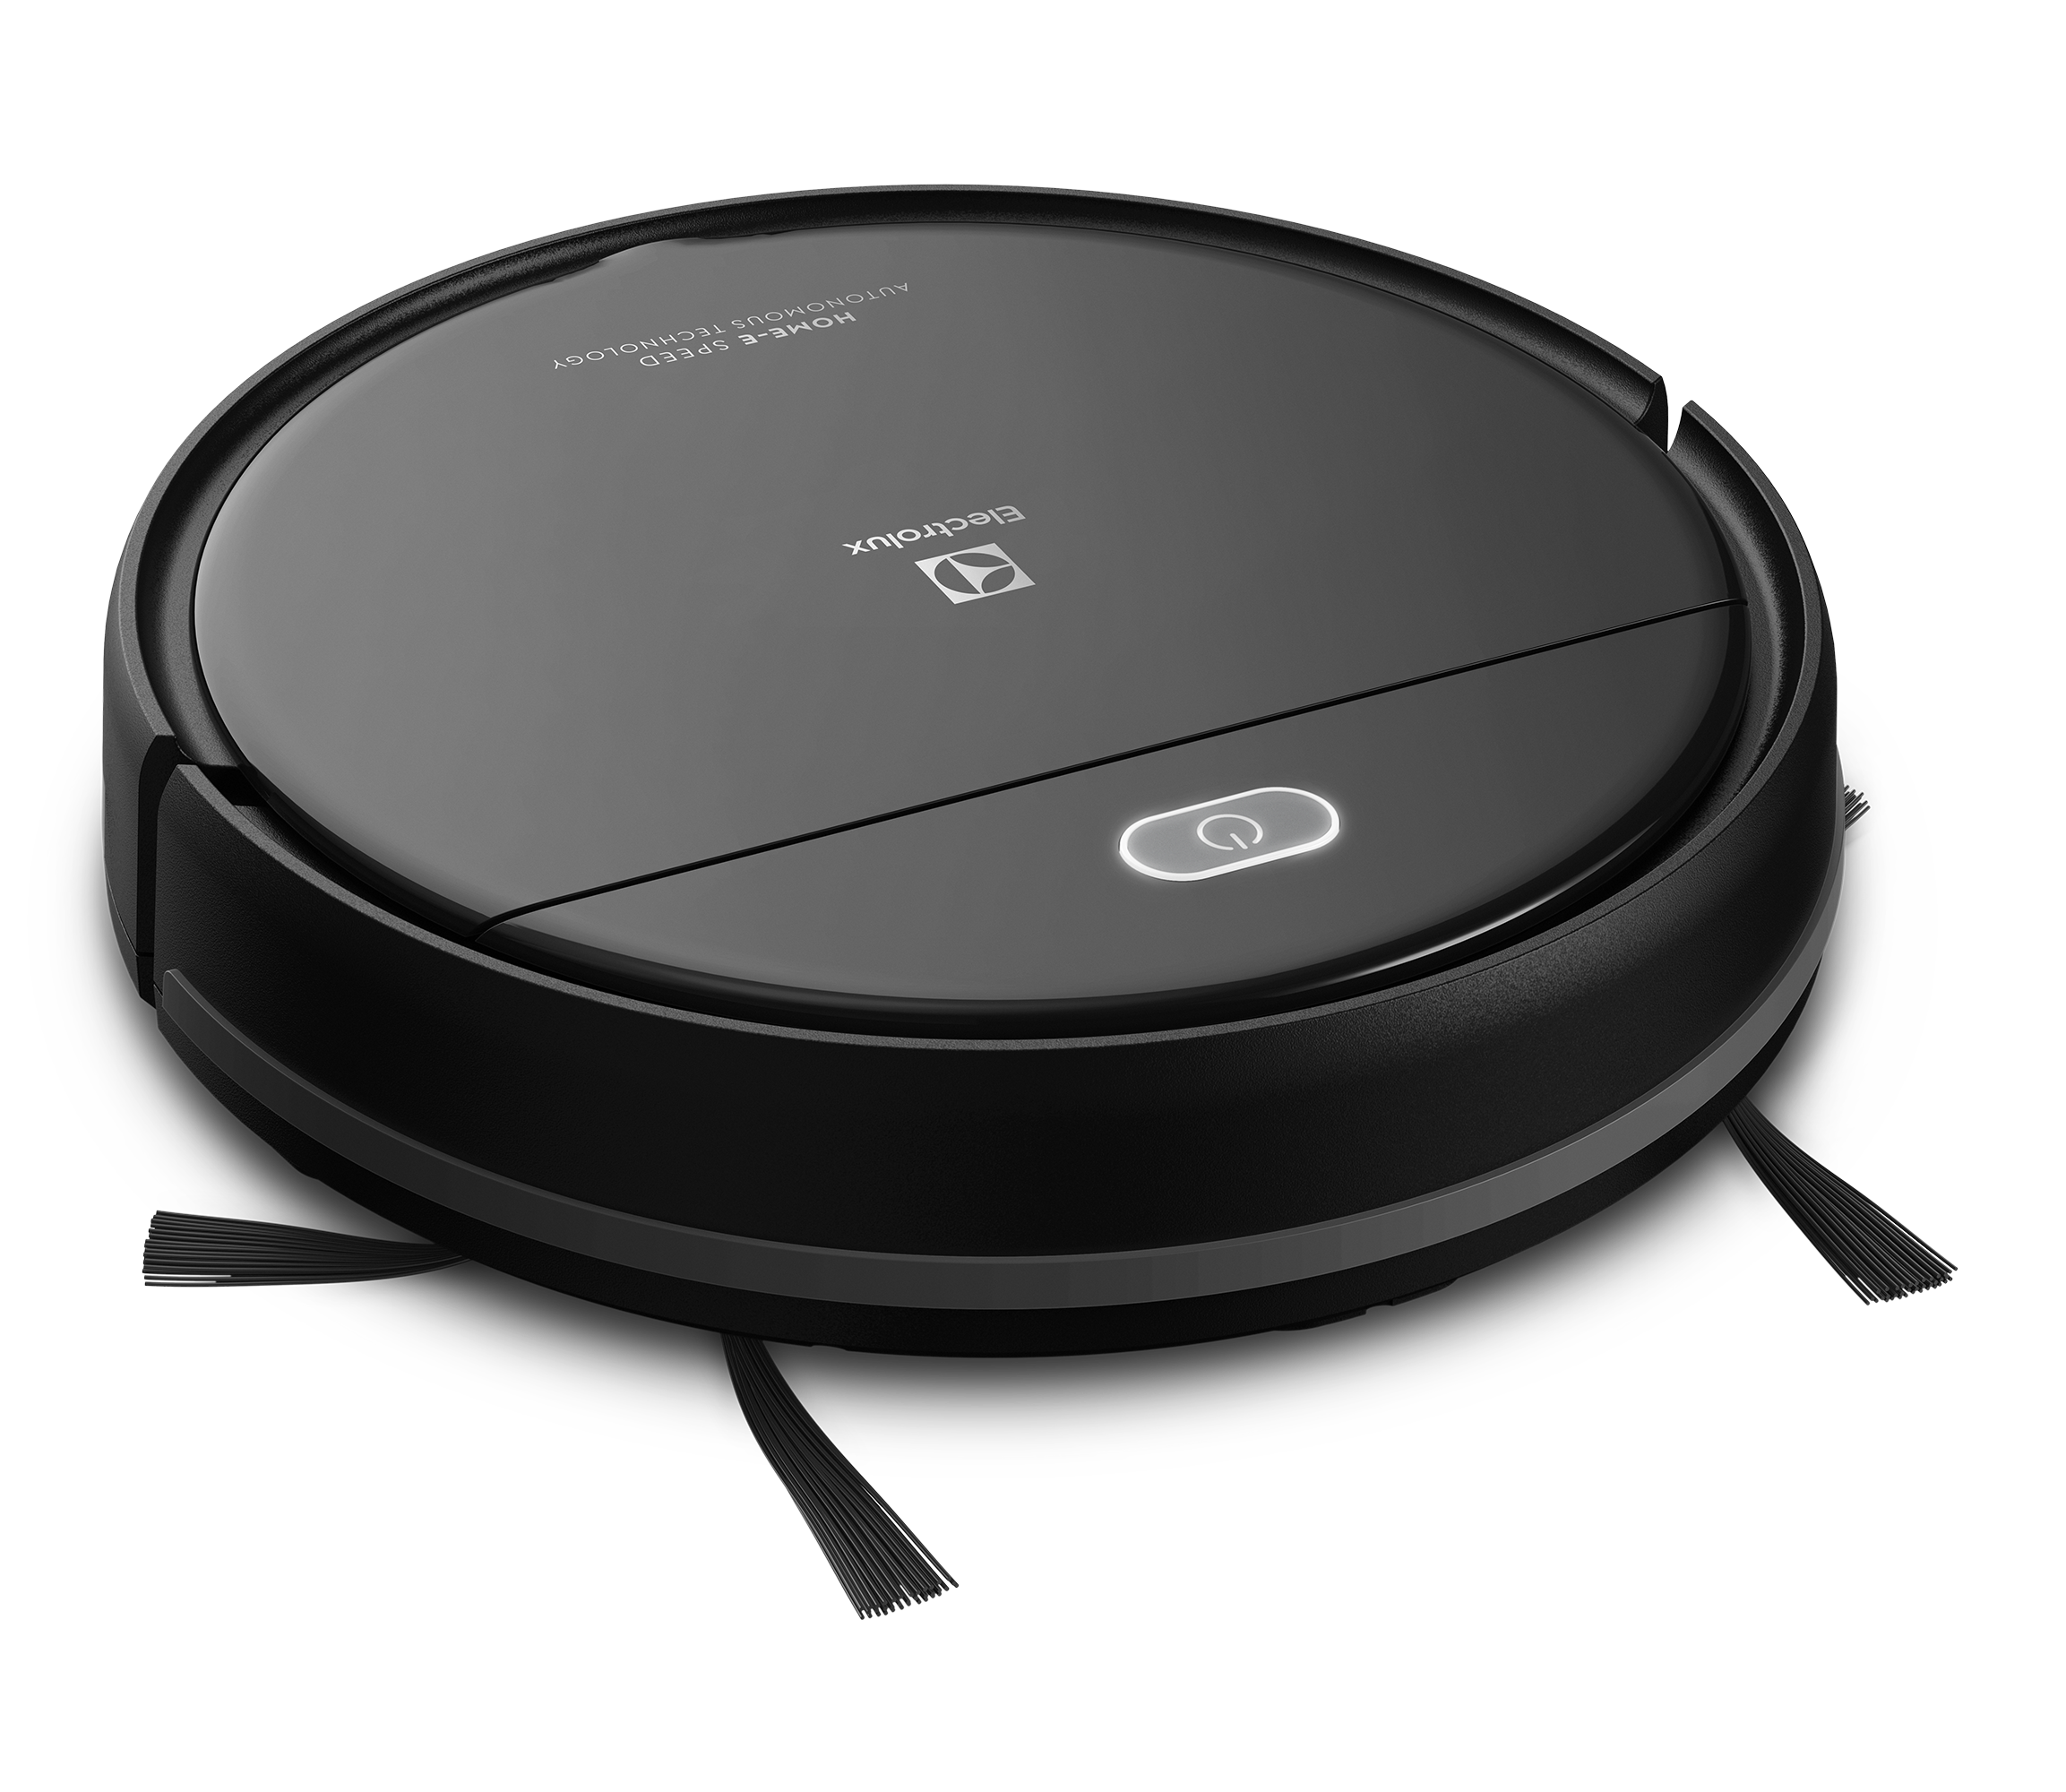 https://content.electrolux.com.br/andinos/electrolux/erb10-andinos/images/Robot_Vacuum_ERB10_Perspective_Electrolux.png